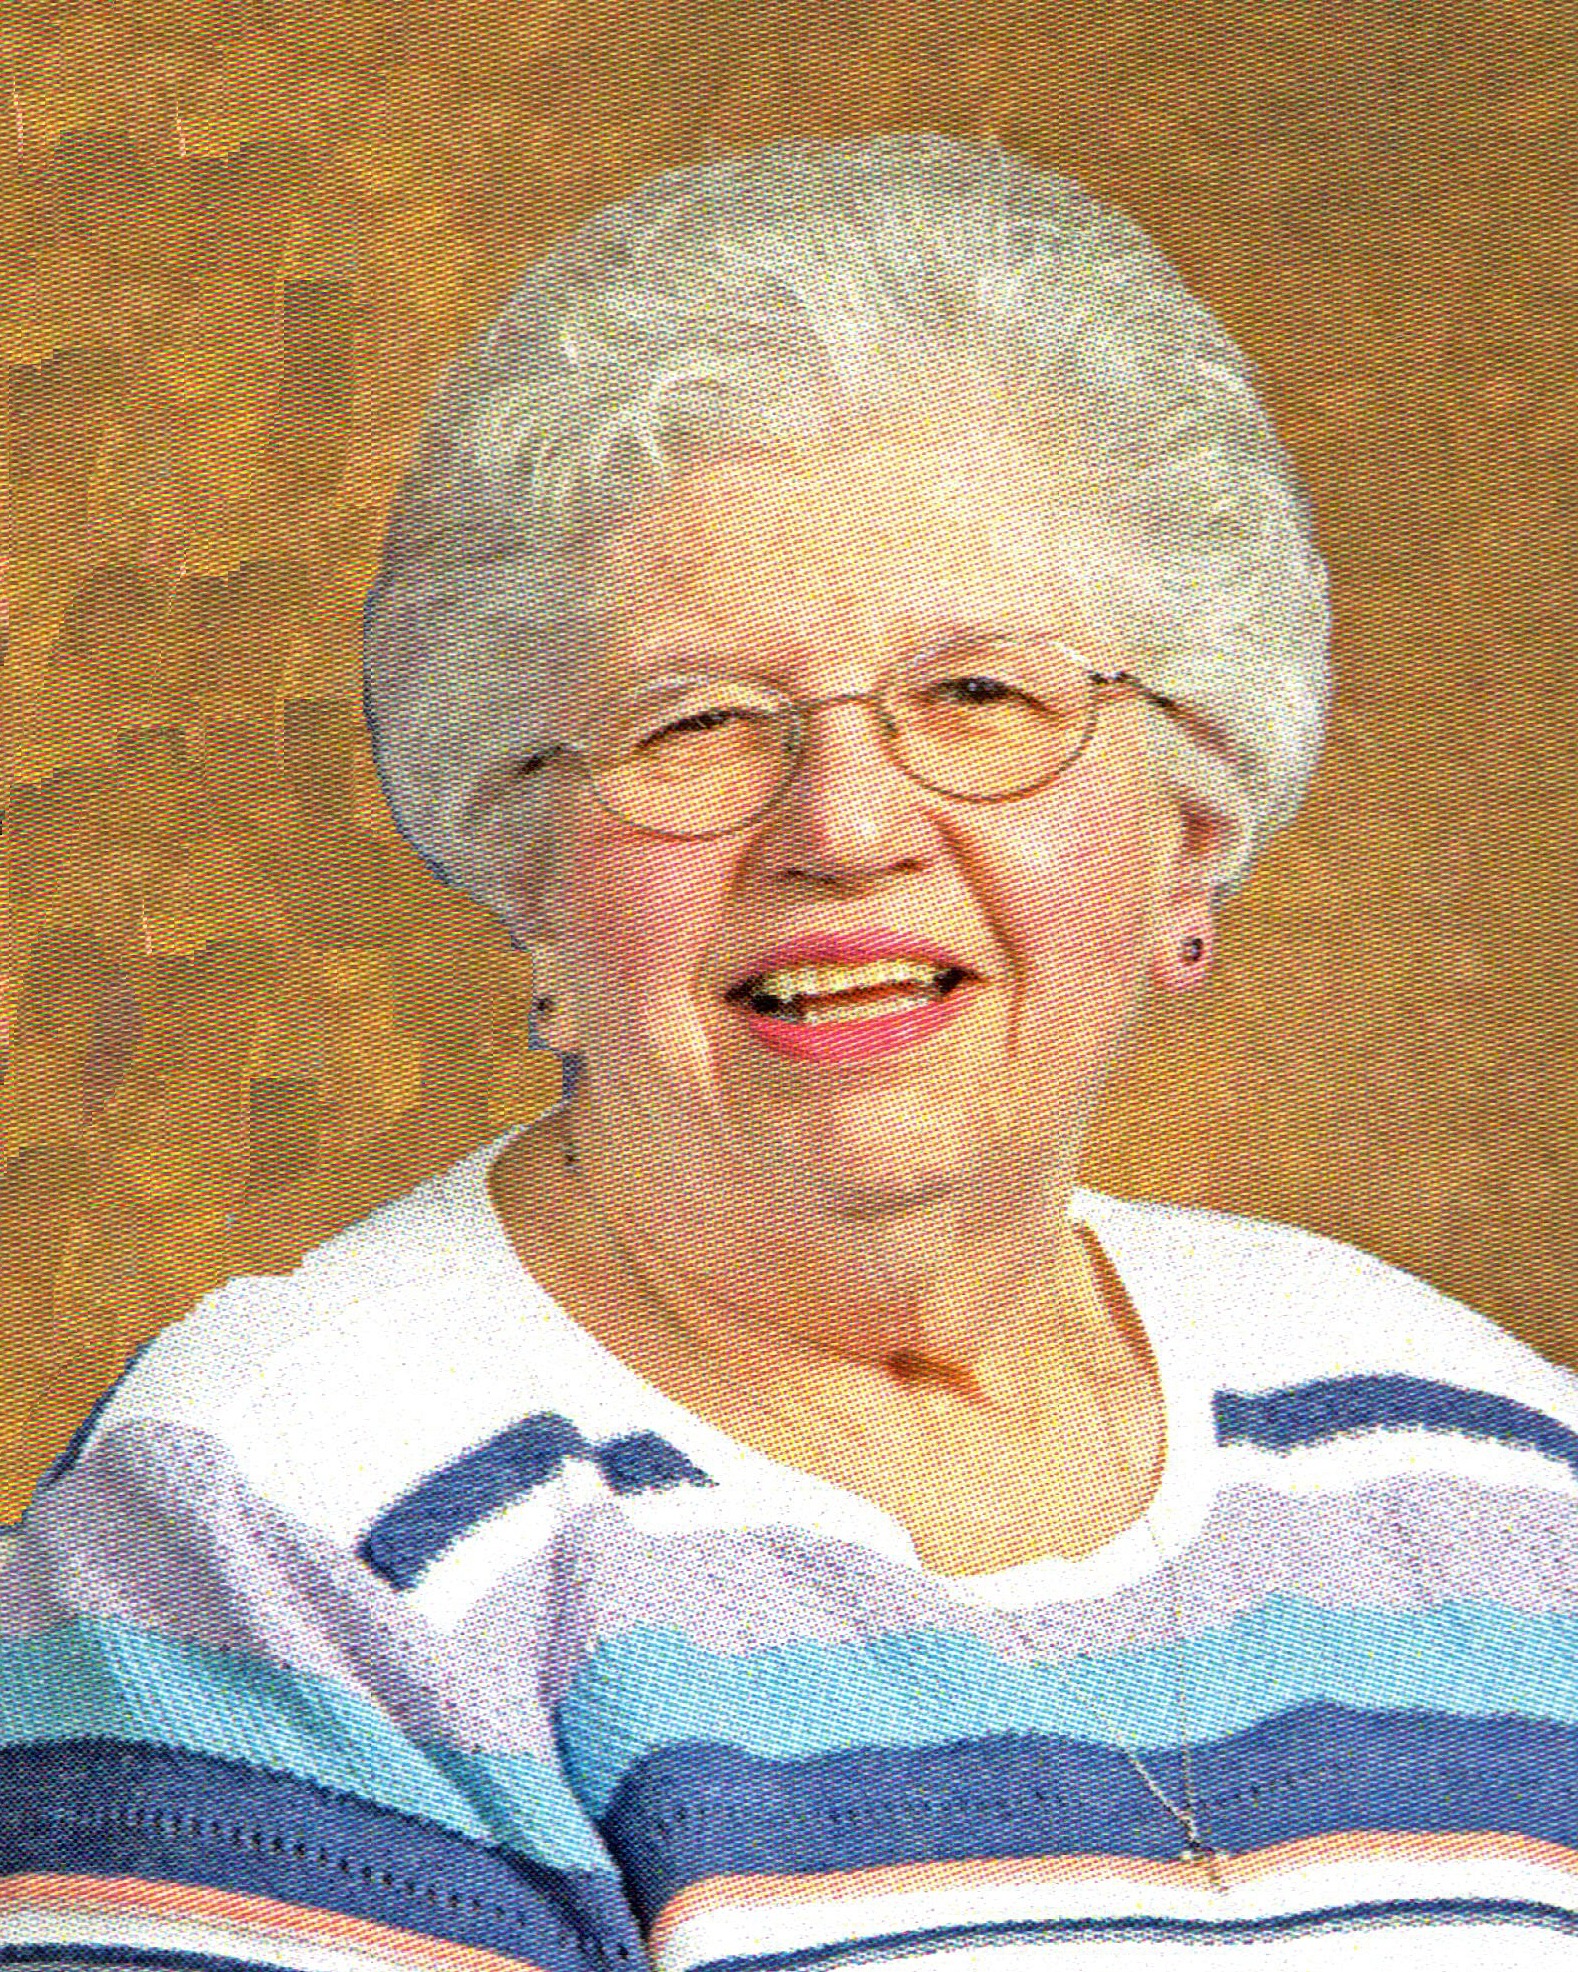 Jeanne H. Snavely Profile Photo